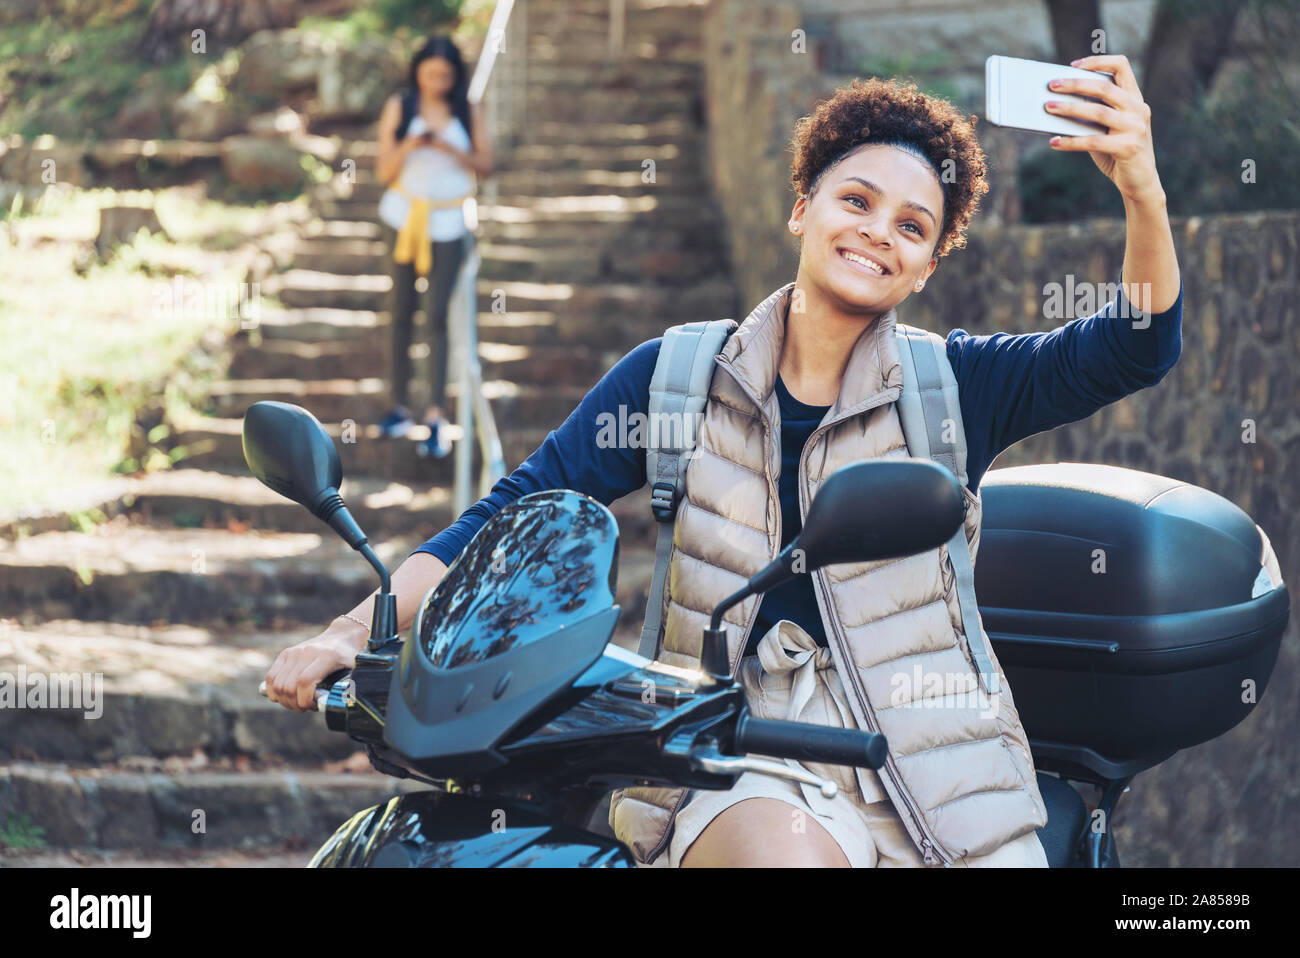 Young woman taking selfie with camera phone on motor scooter Stock Photo